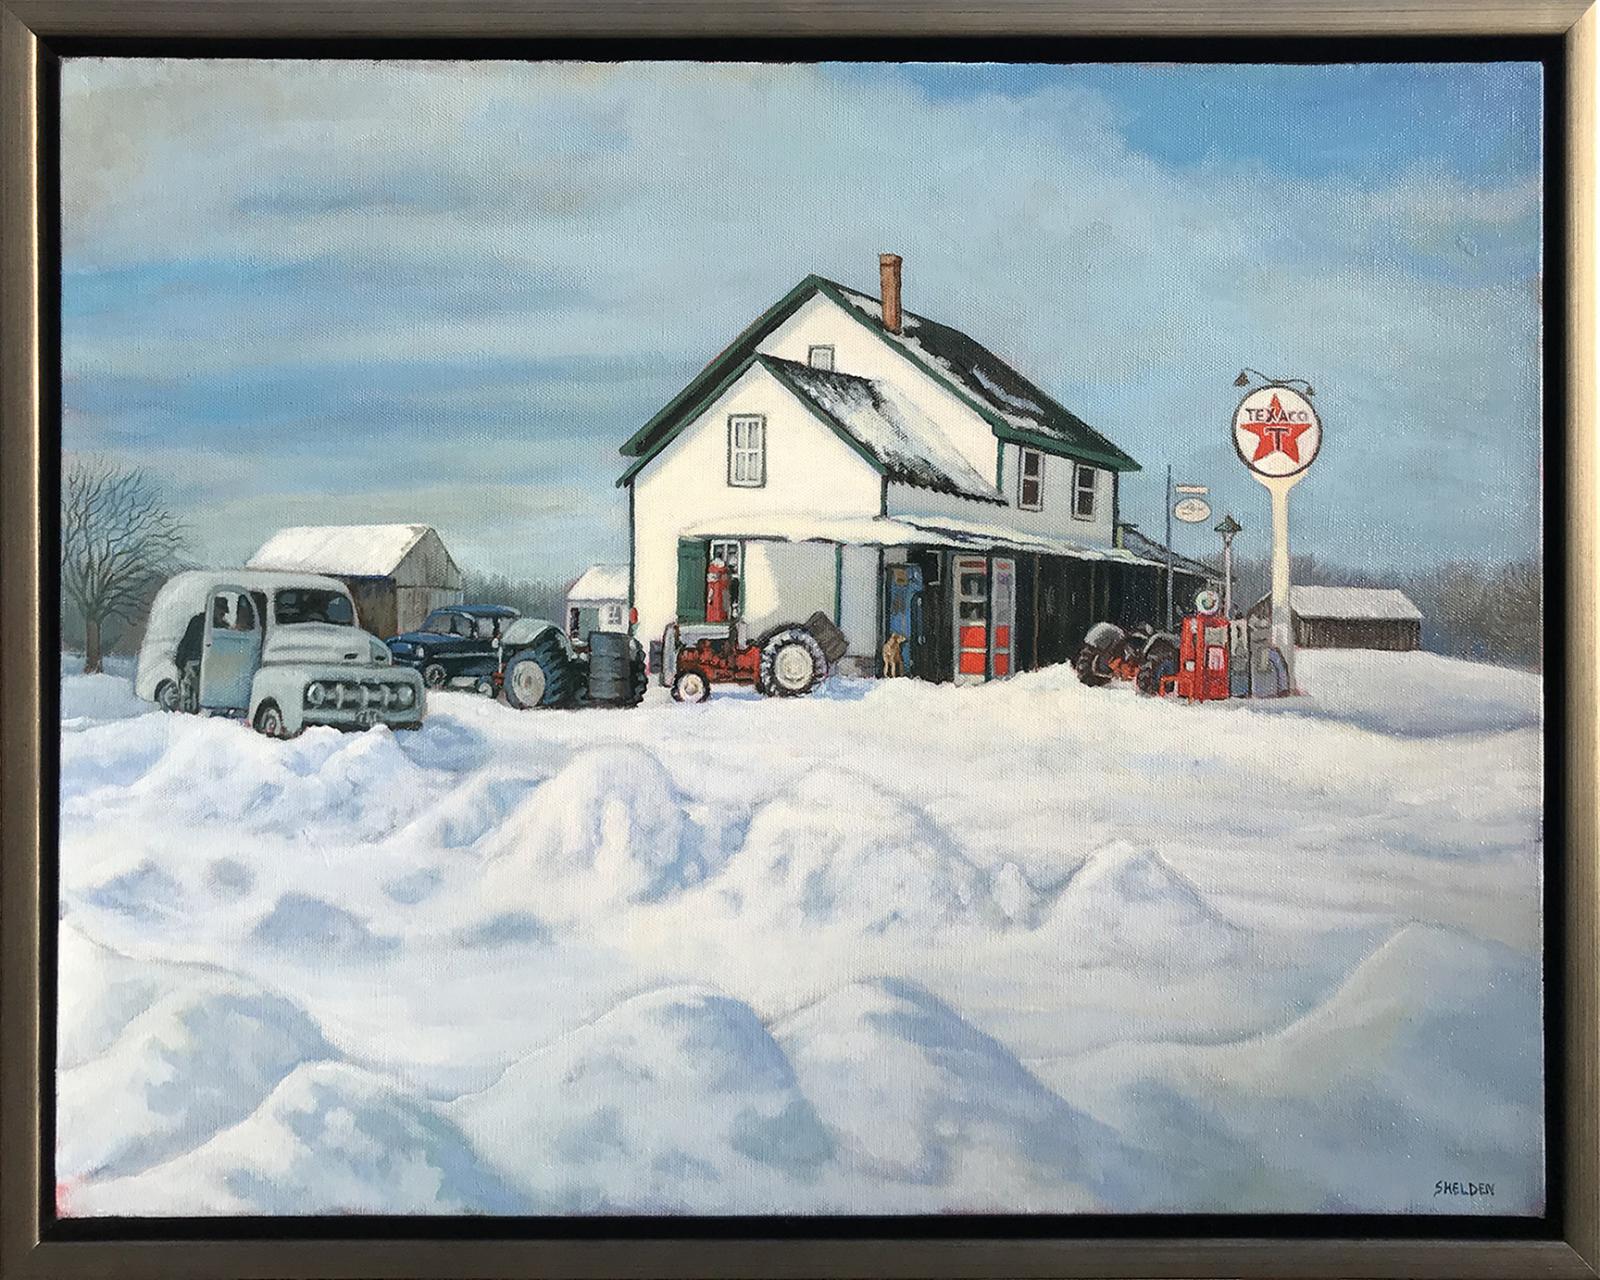 This painting is of the Old Jones Store up at Chaneyville Road in Calvert County. The original slide source came from a local farmer and is dated around 1958.